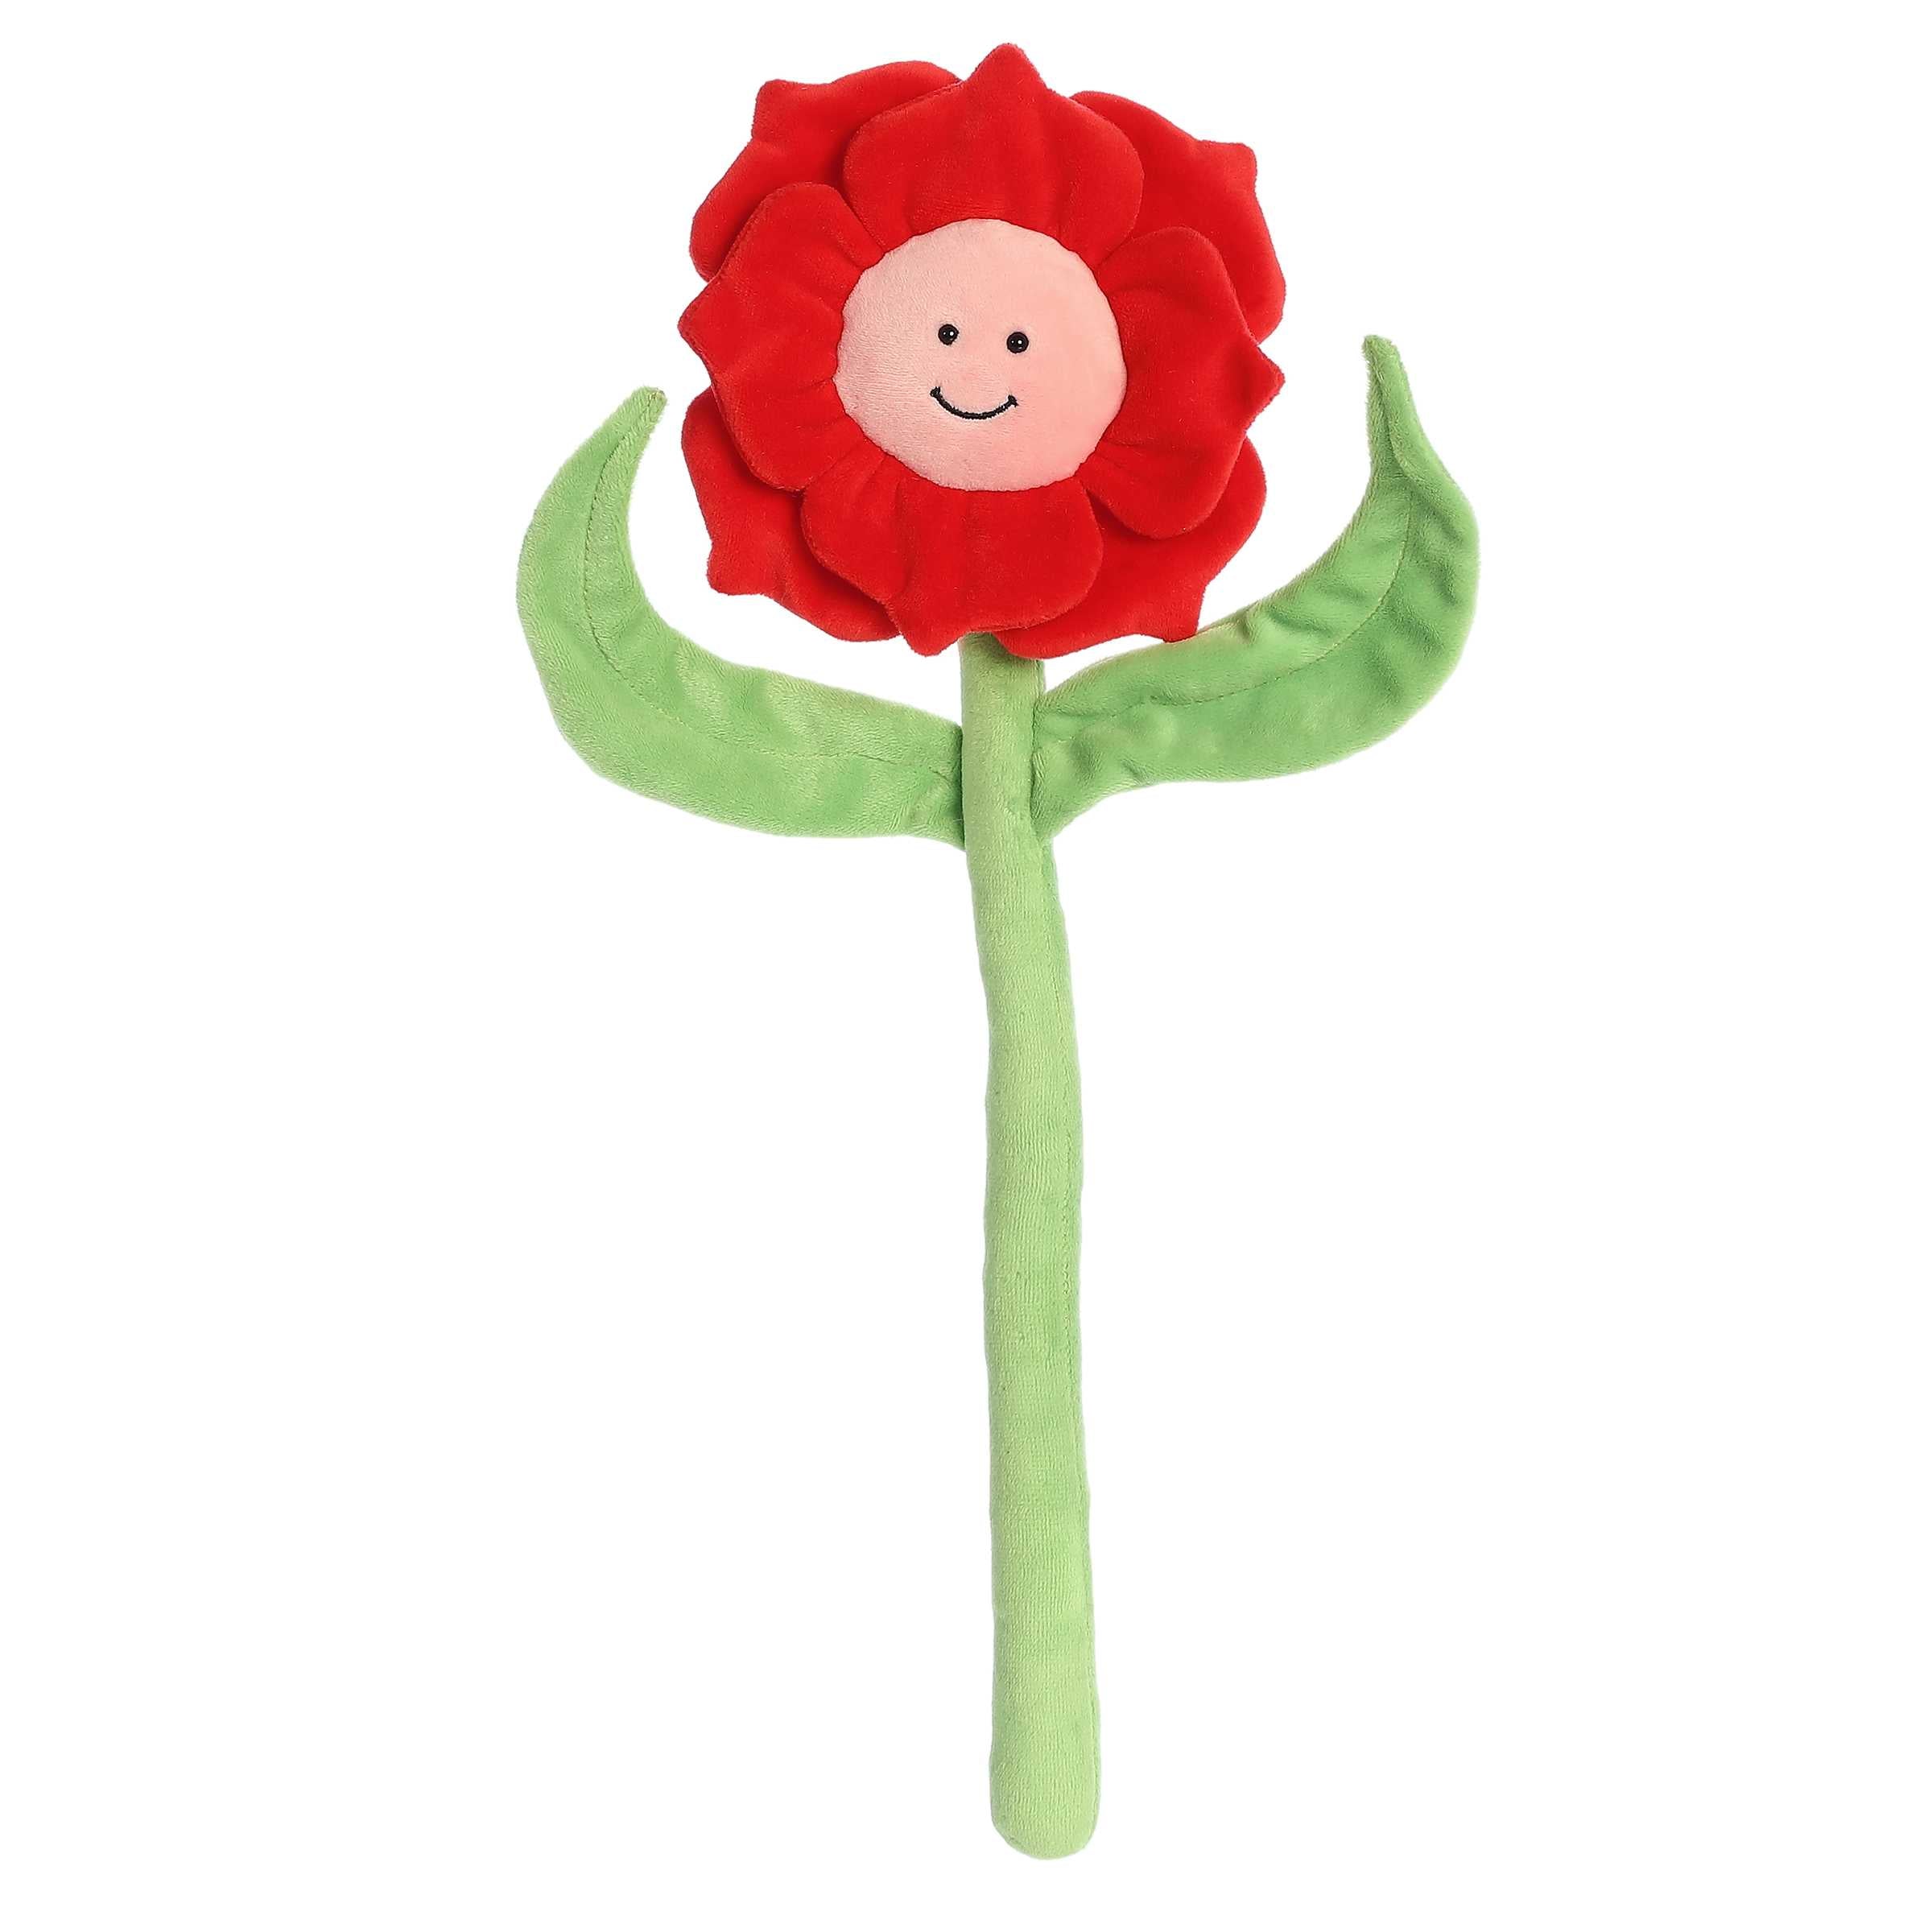 Pink Poseez flower toy shaped like a posy with bendable stem, pink petals, and a center featuring a playful winking face.